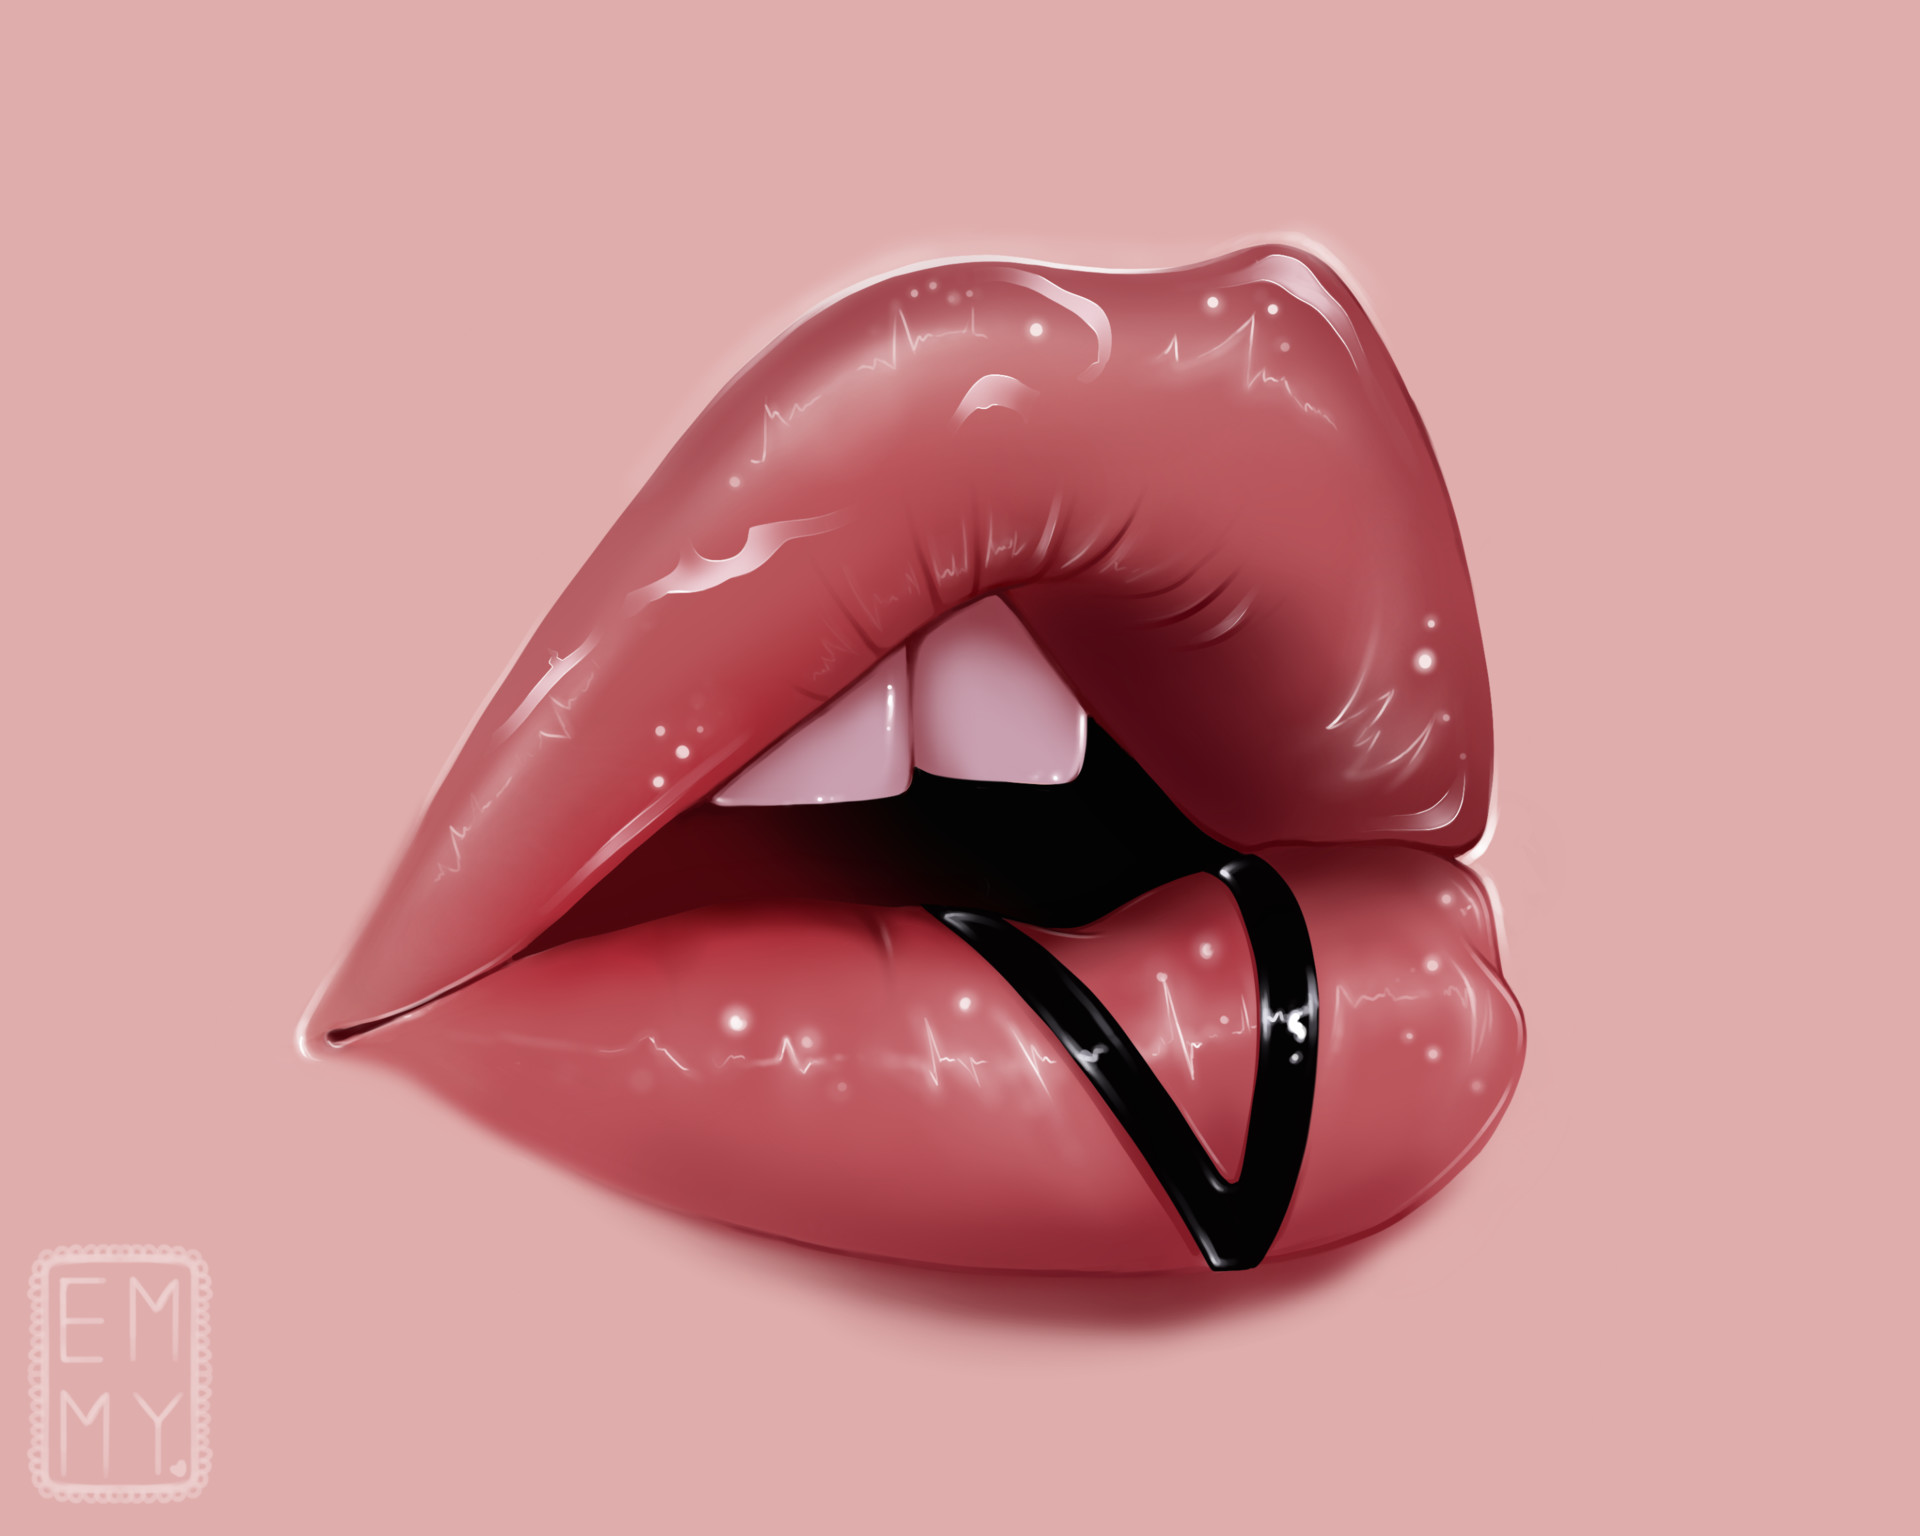 Glossy Lips - Graphite Drawing by Aymartie on DeviantArt